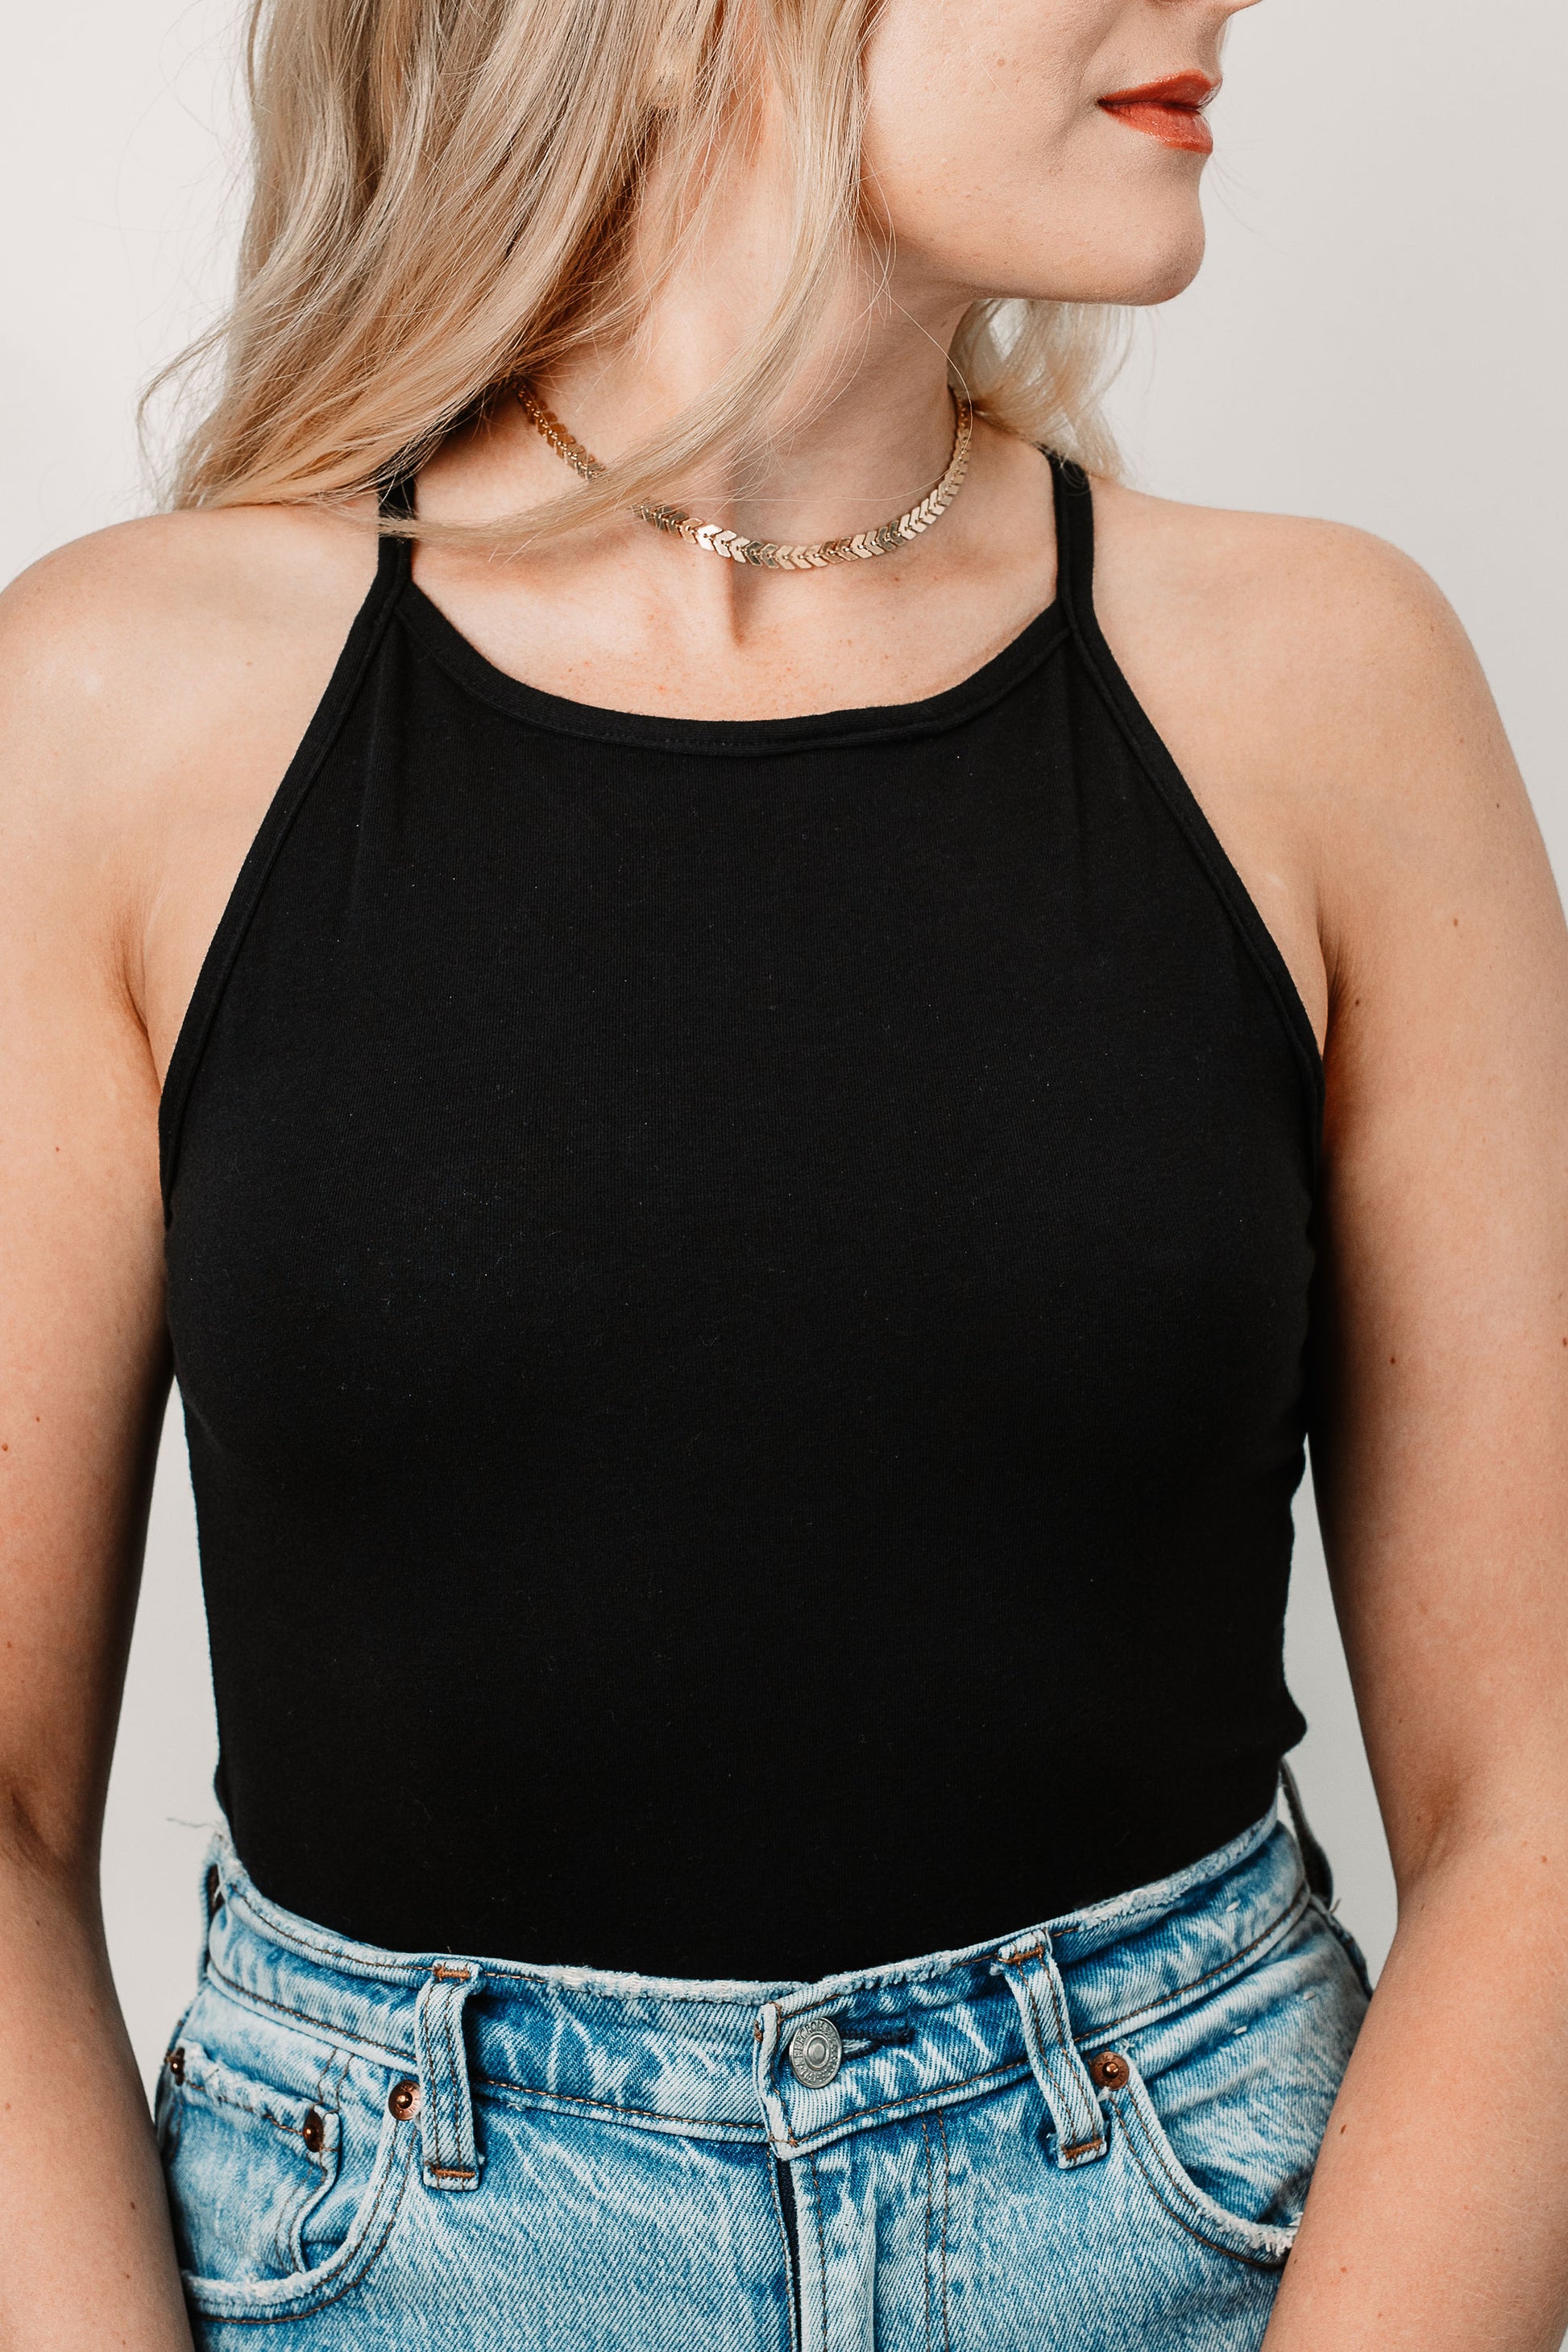 Charlotte wears the Black Willa Bodysuit in size XS. Close up.